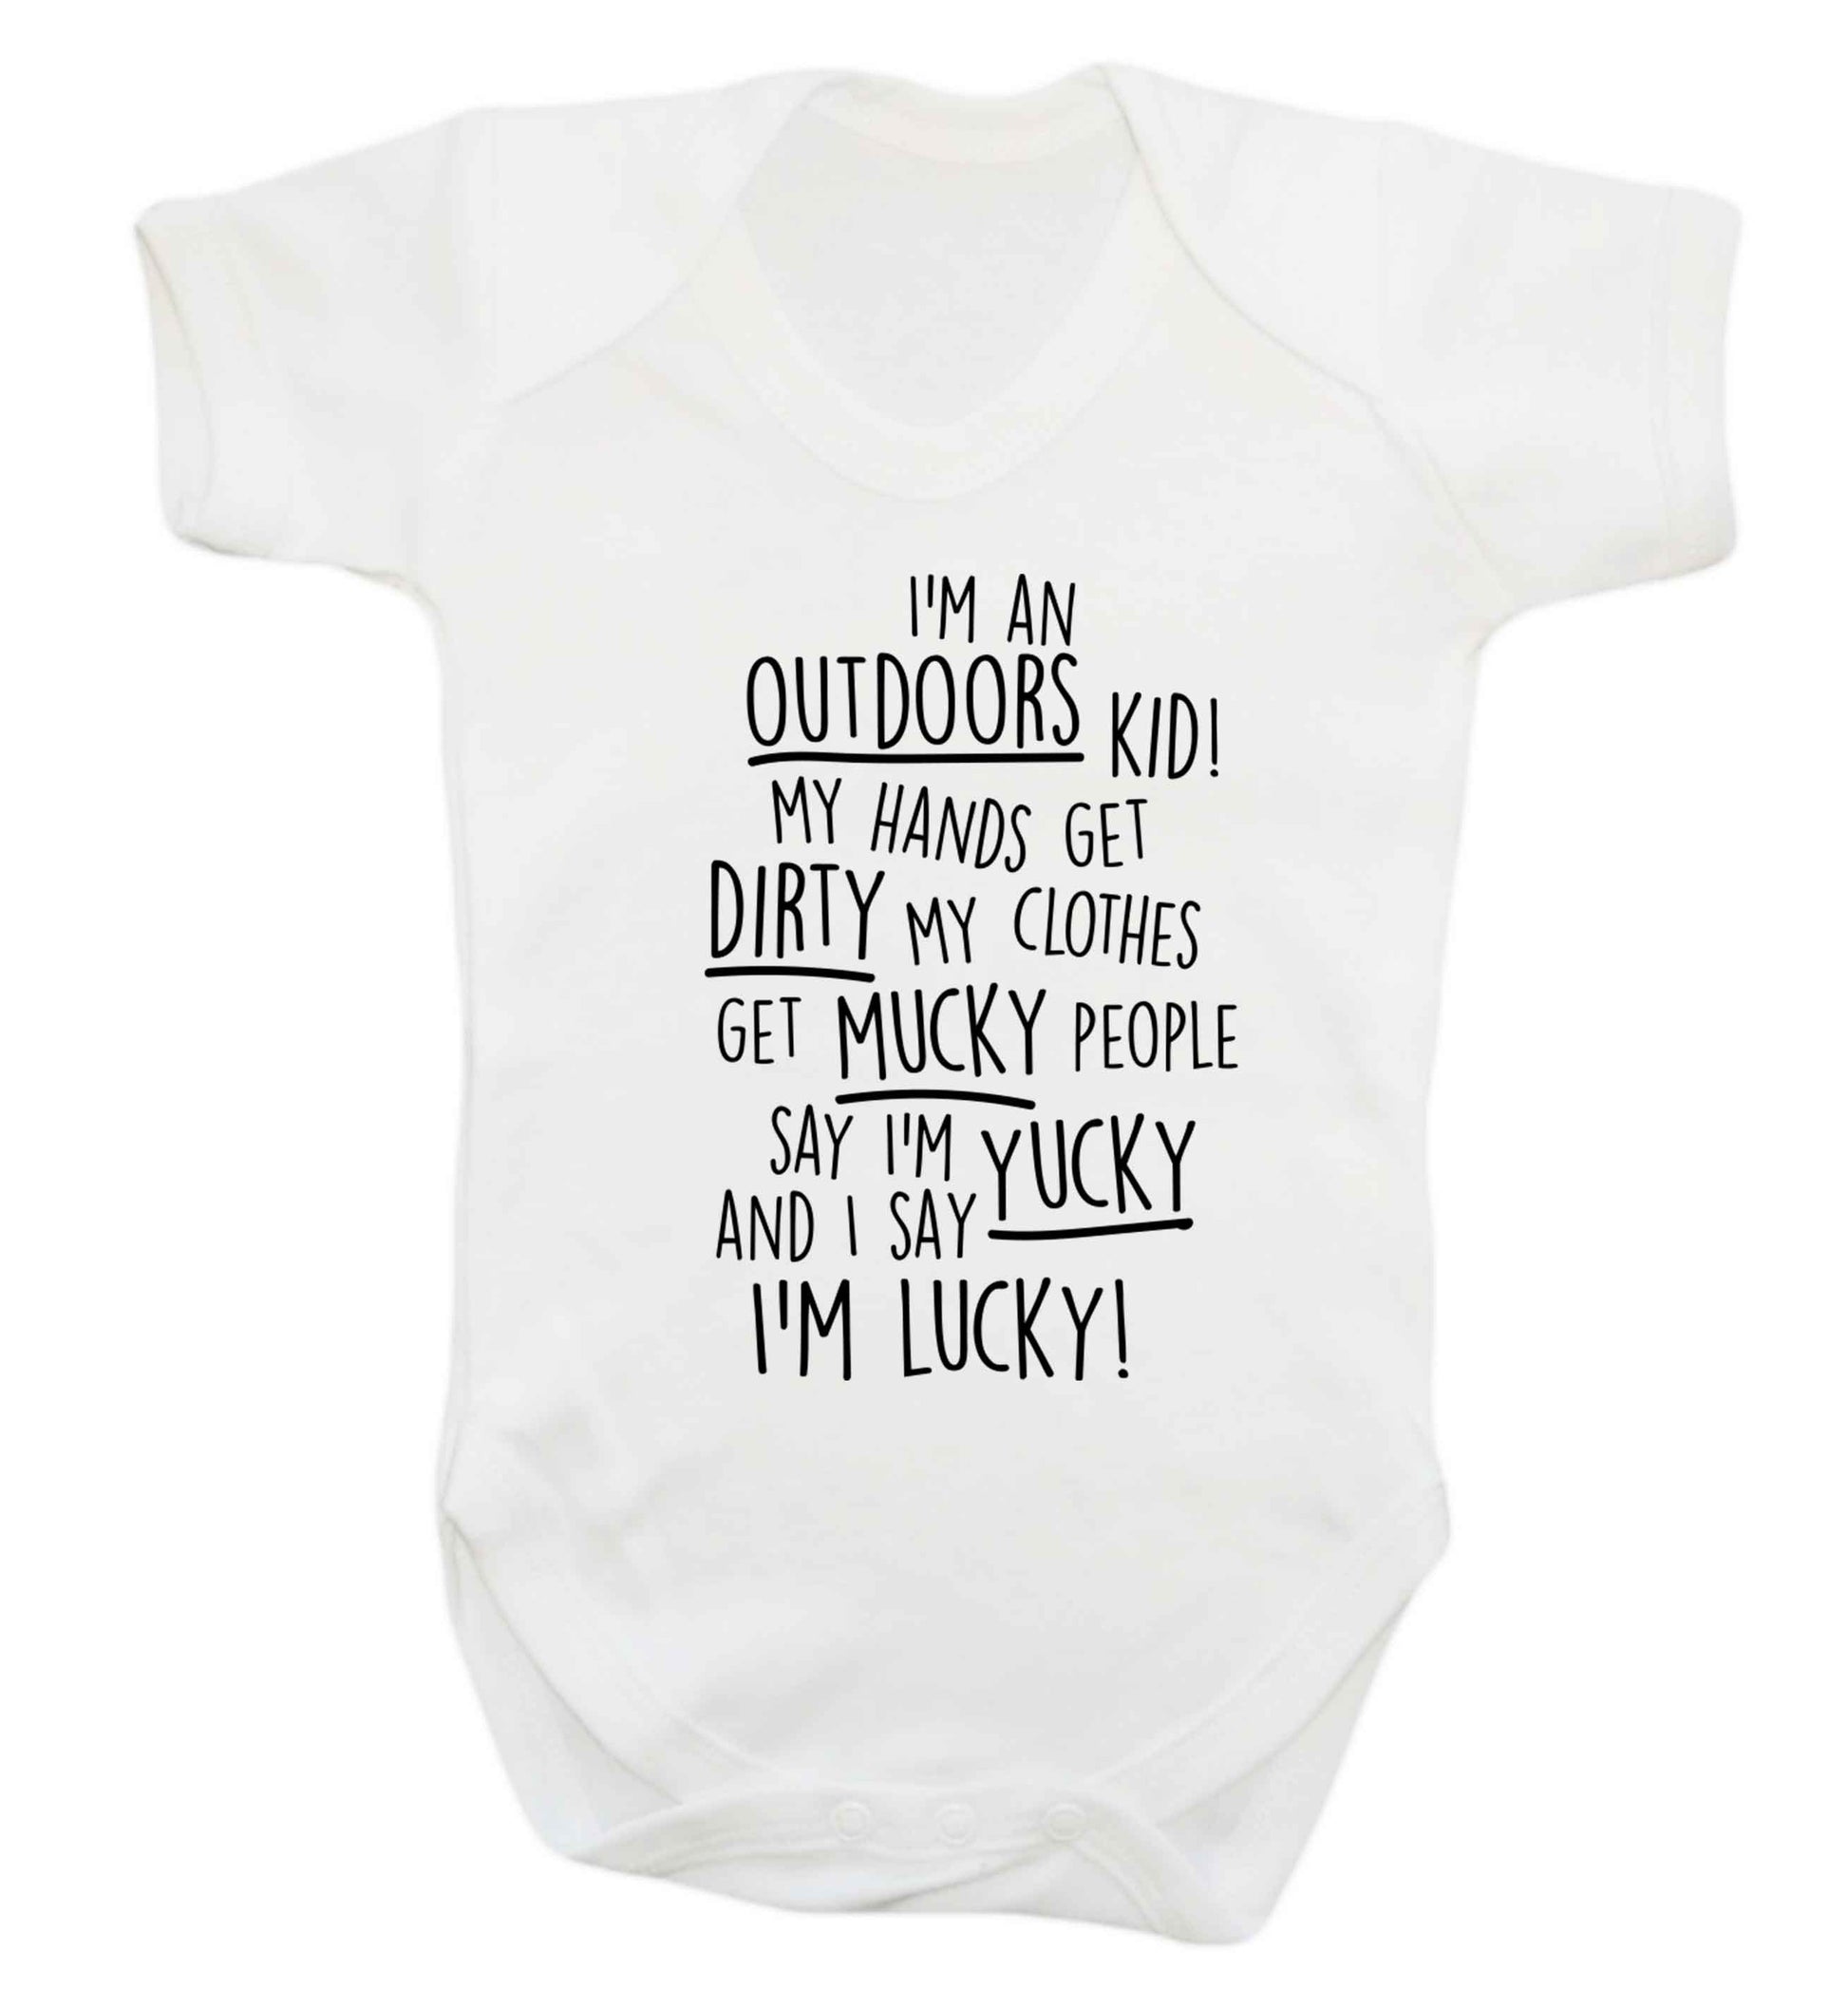 I'm an outdoors kid poem Baby Vest white 18-24 months